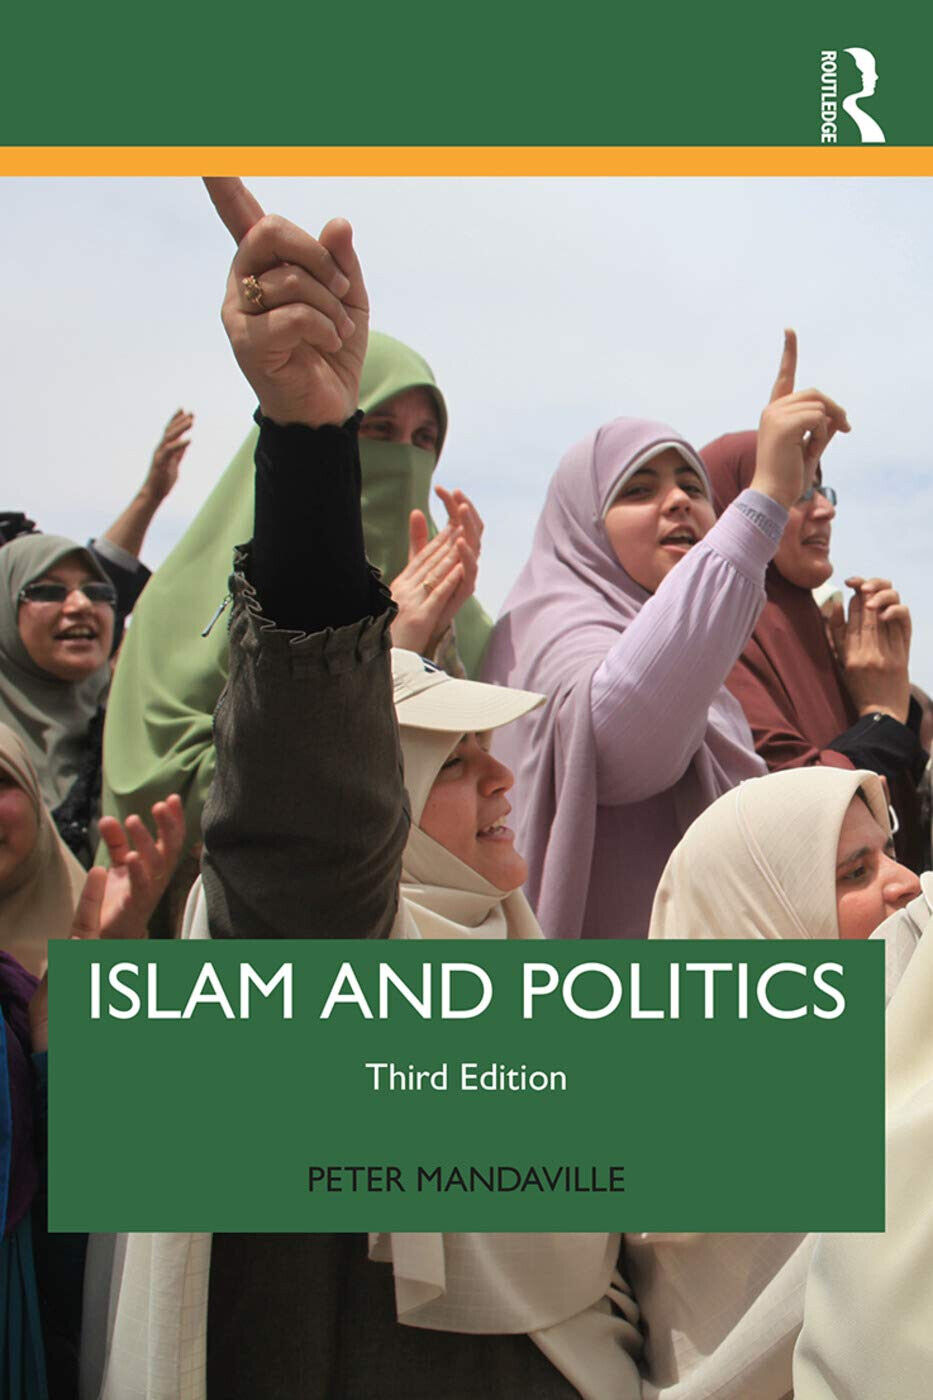 Islam And Politics (3rd Edition) - Peter Mandaville - Routledge, 2020